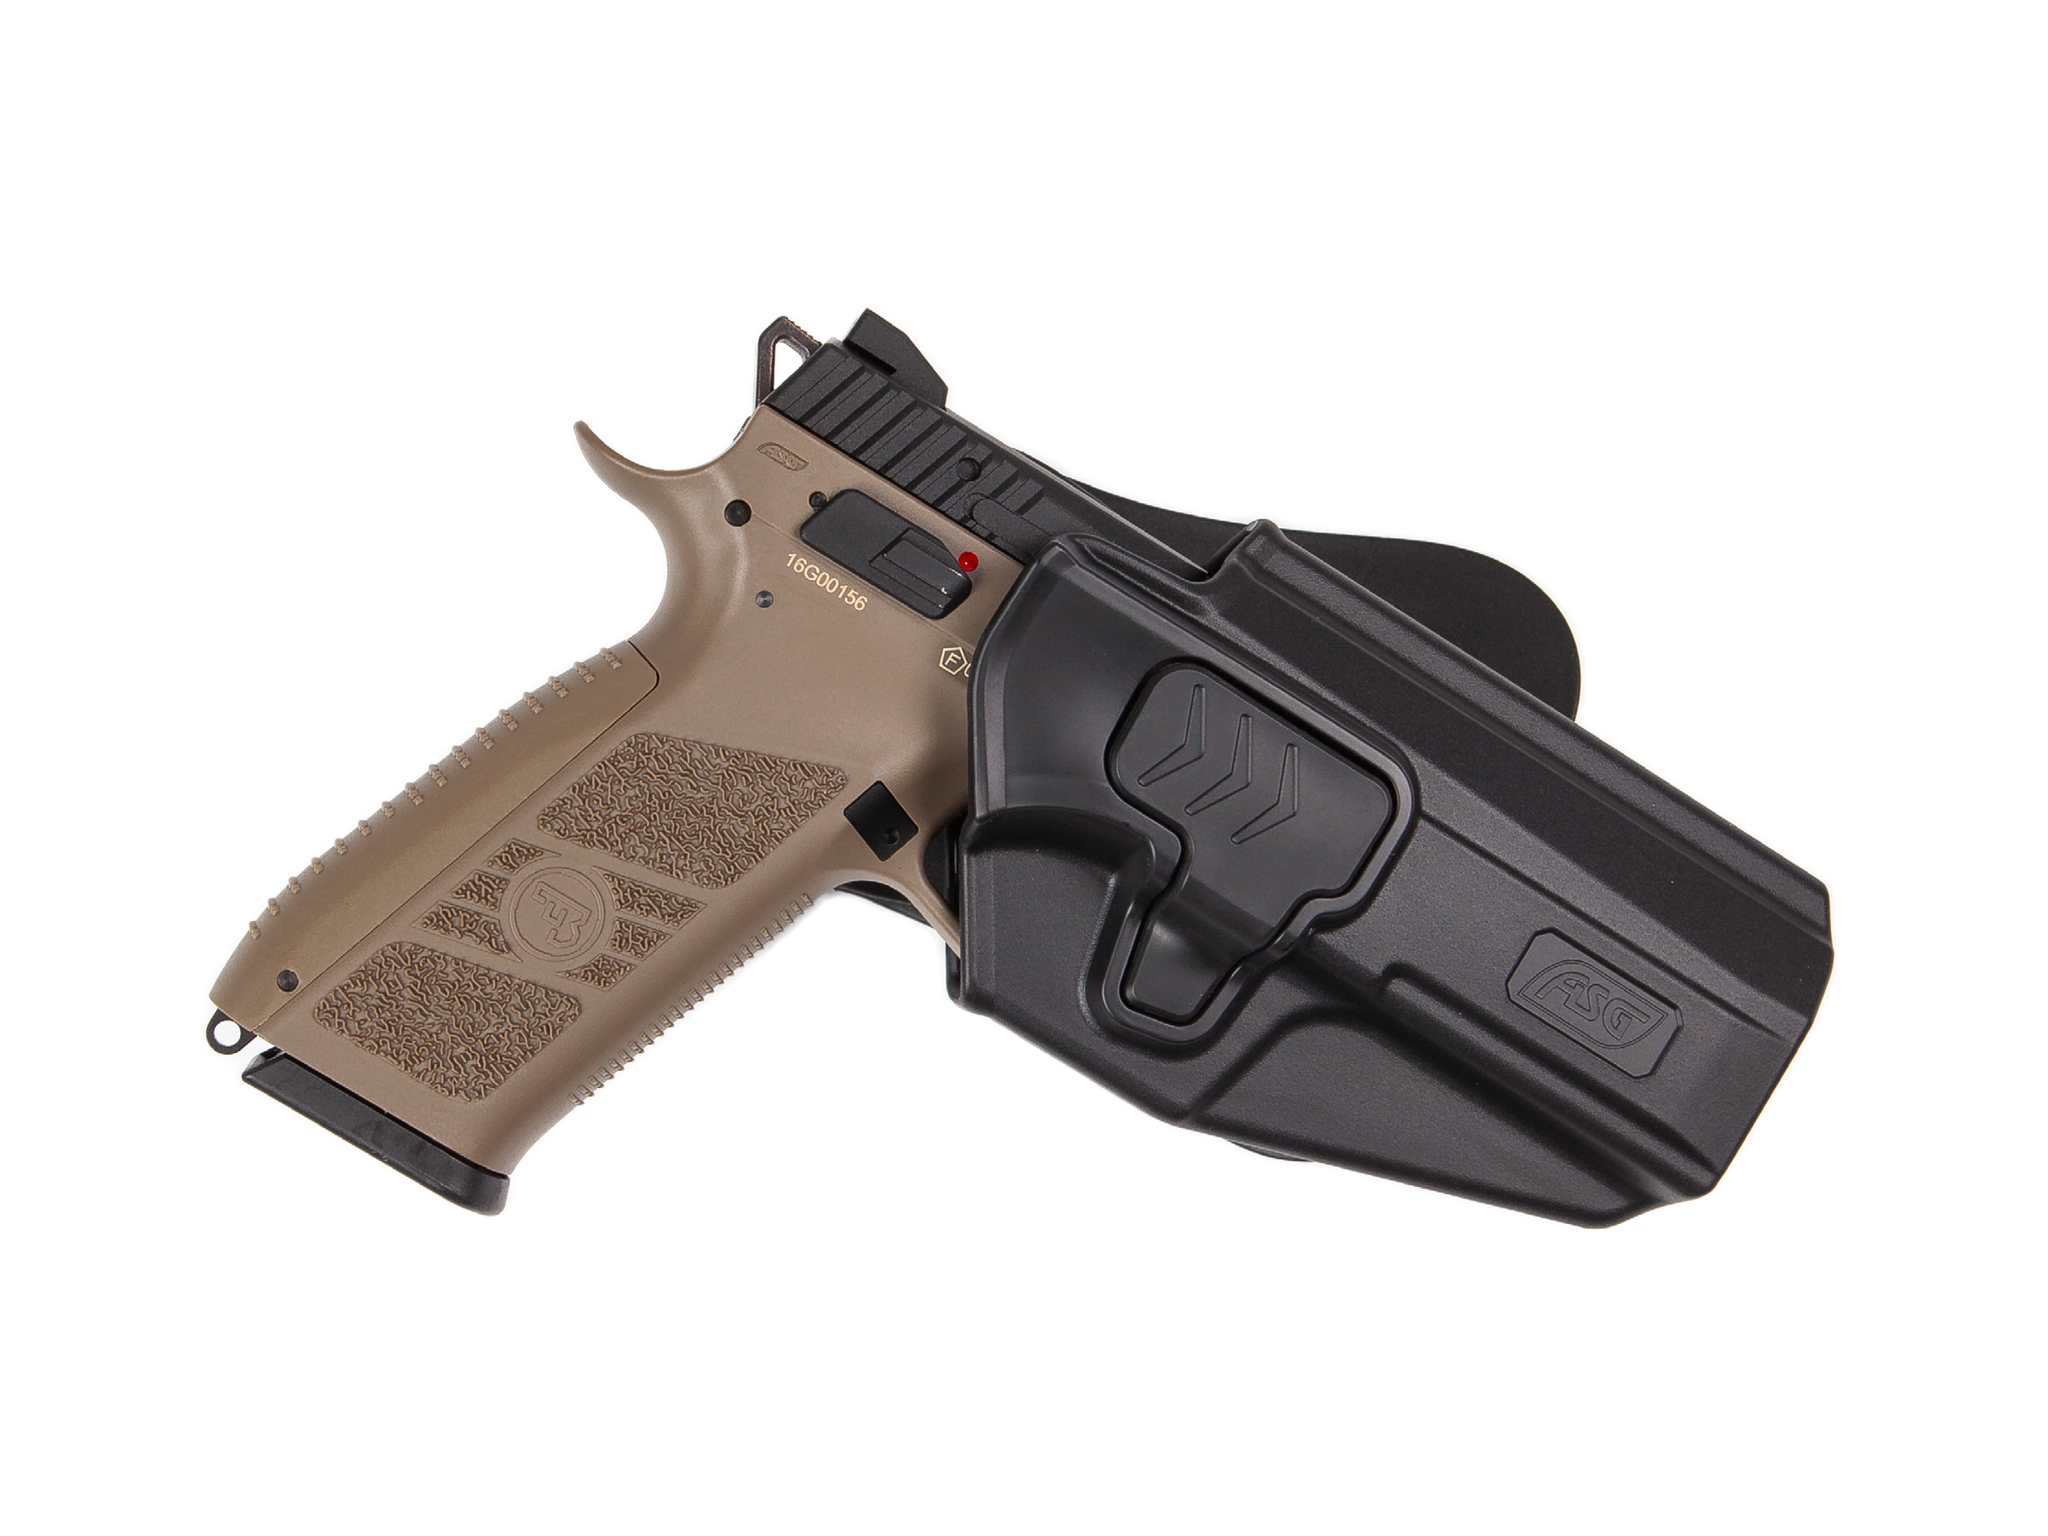 ASG Paddle Holster CZ P-07, P-09, P-09 OR, CZ75 and SP-01 Shadow- BK